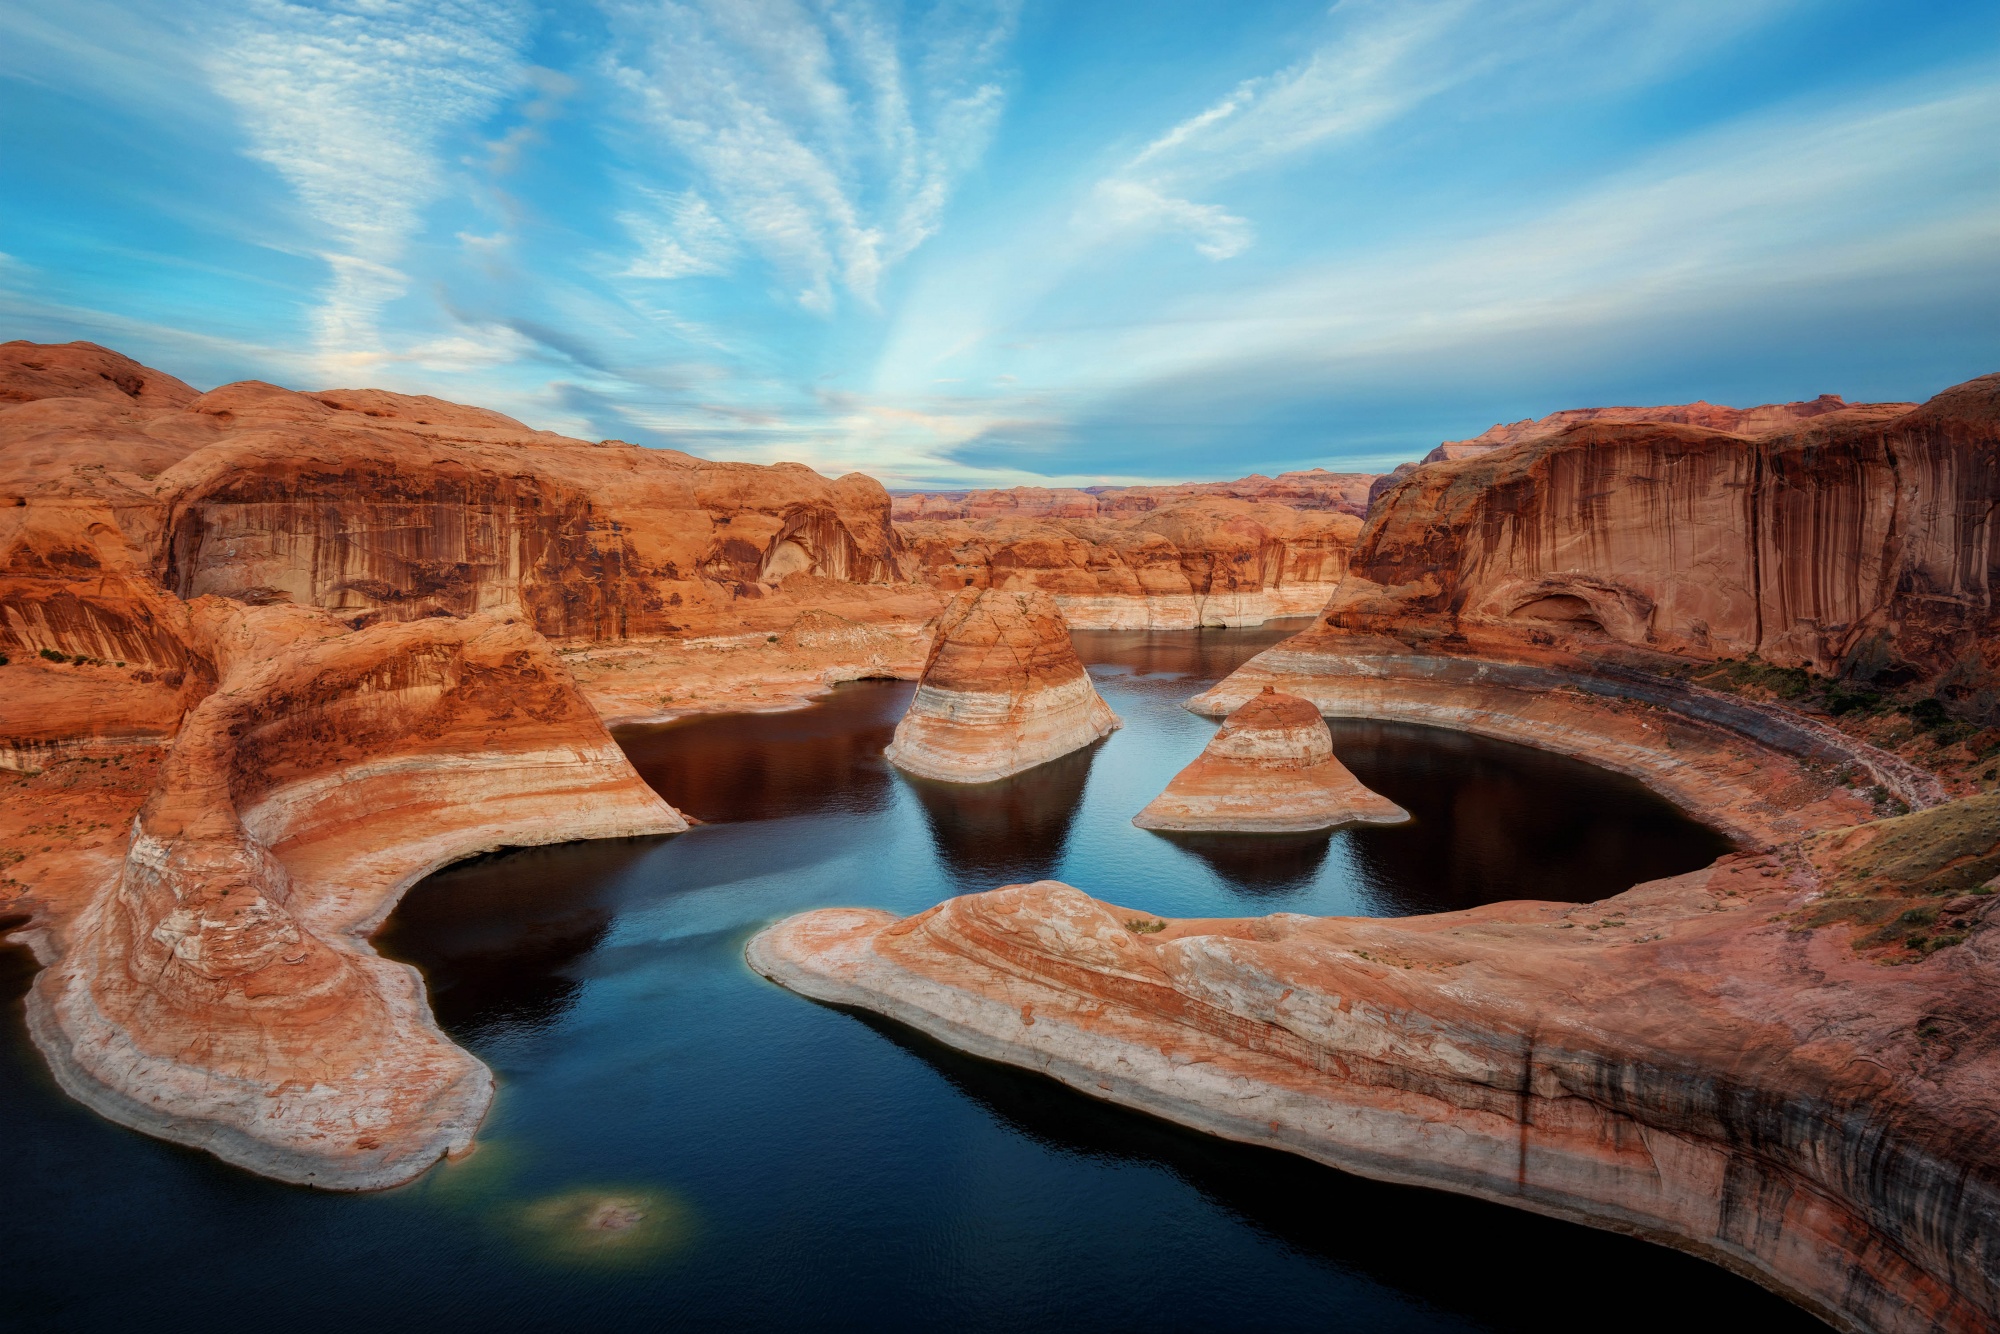 Best remote destinations, beautiful view of Lake Powell Utah's flooded canyon